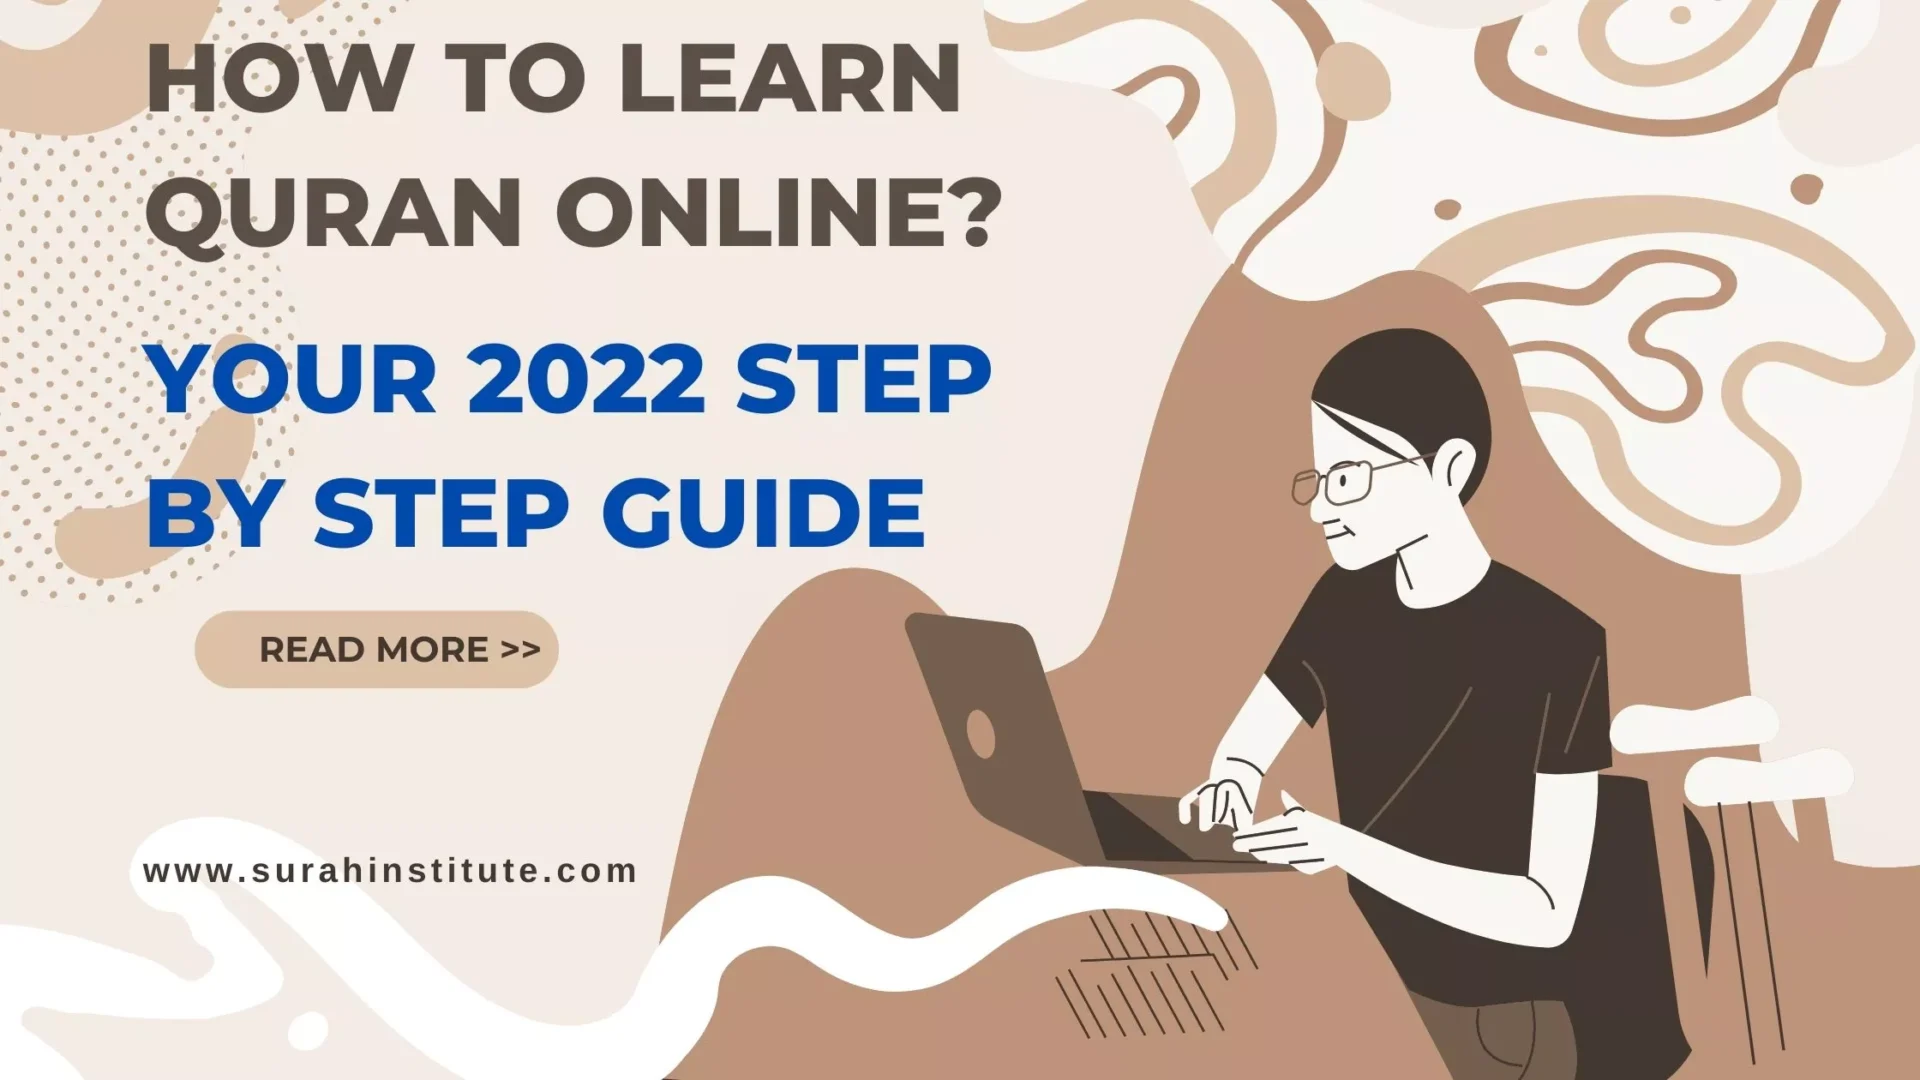 How To Learn Quran Online Your 2022 Step By Step Guide